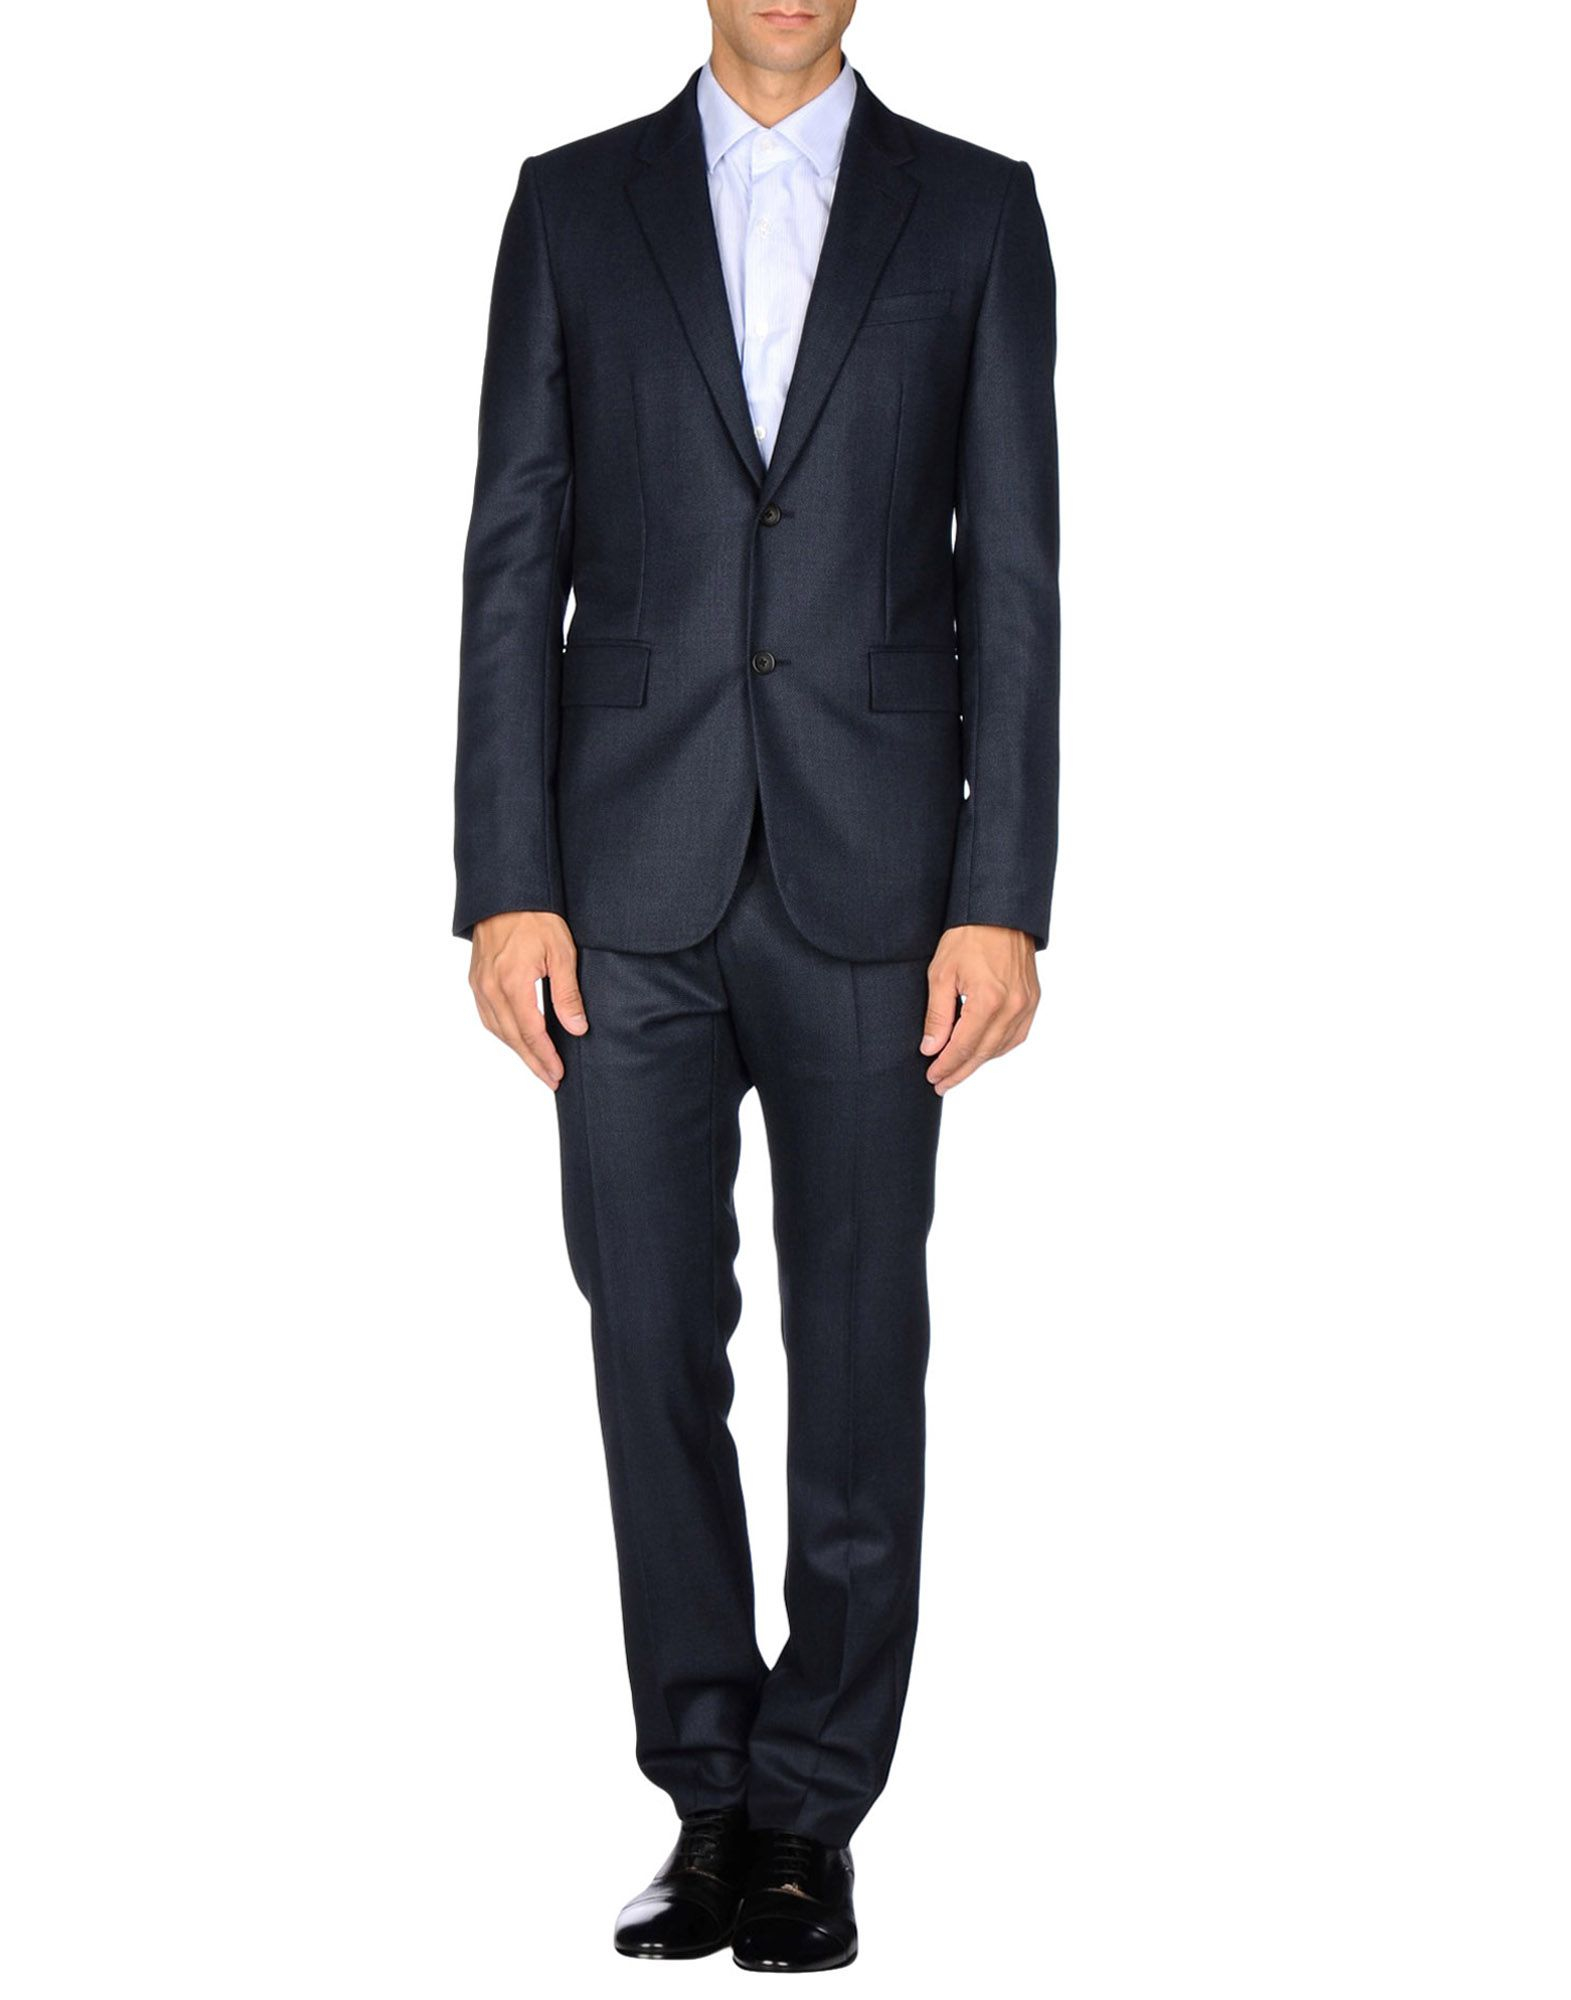 Lyst - Balenciaga Suit in Blue for Men